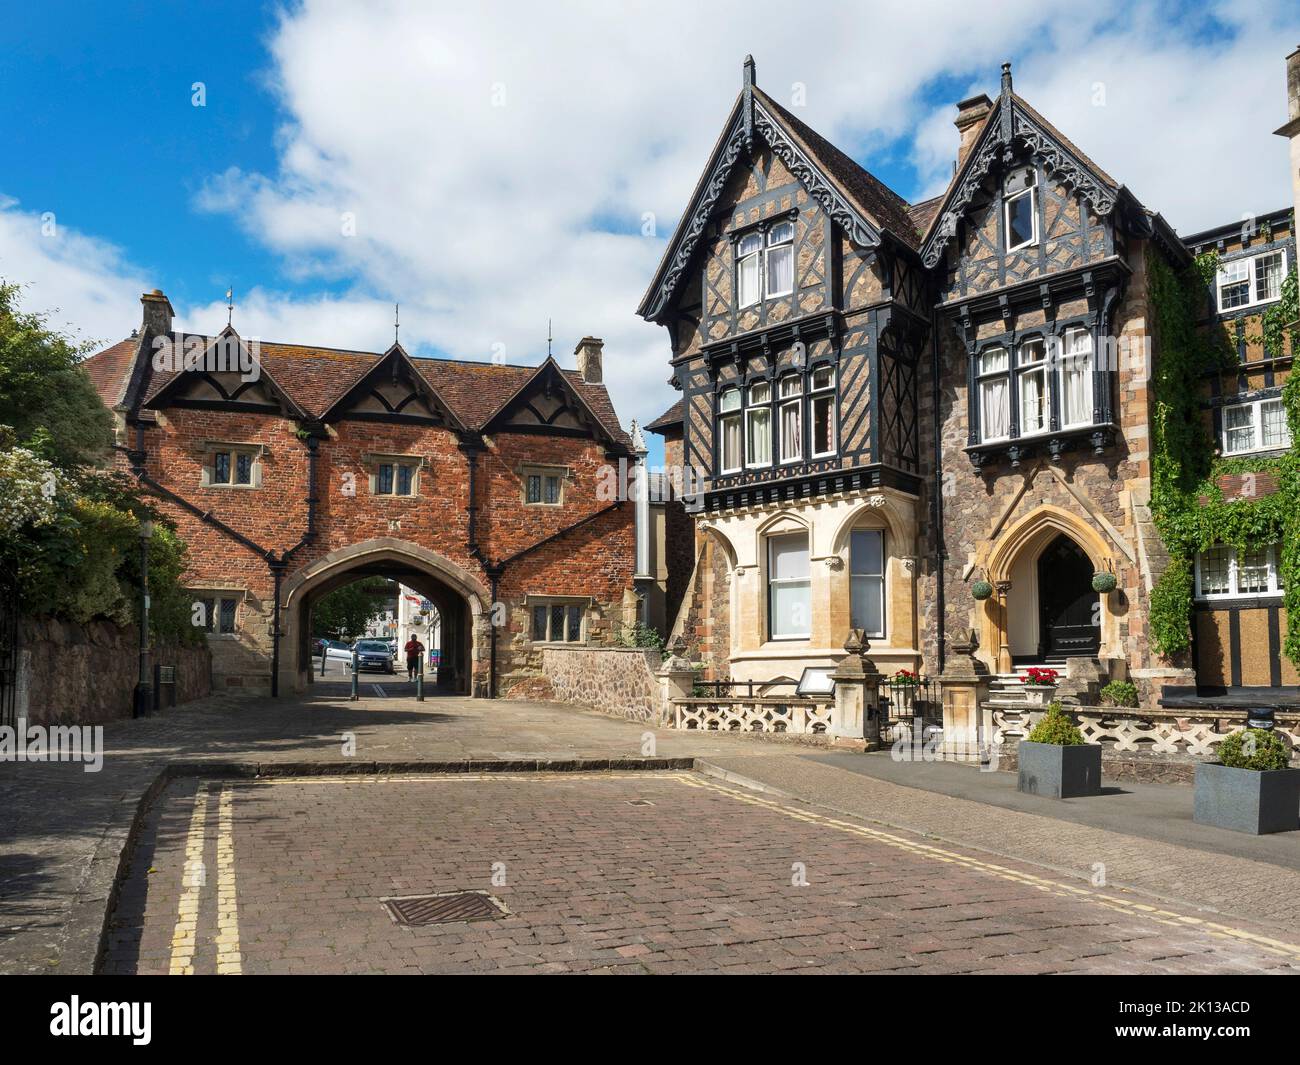 Abbey Gateway and Abbey Hotel in Great Malvern, Worcestershire, England, United Kingdom, Europe Stock Photo